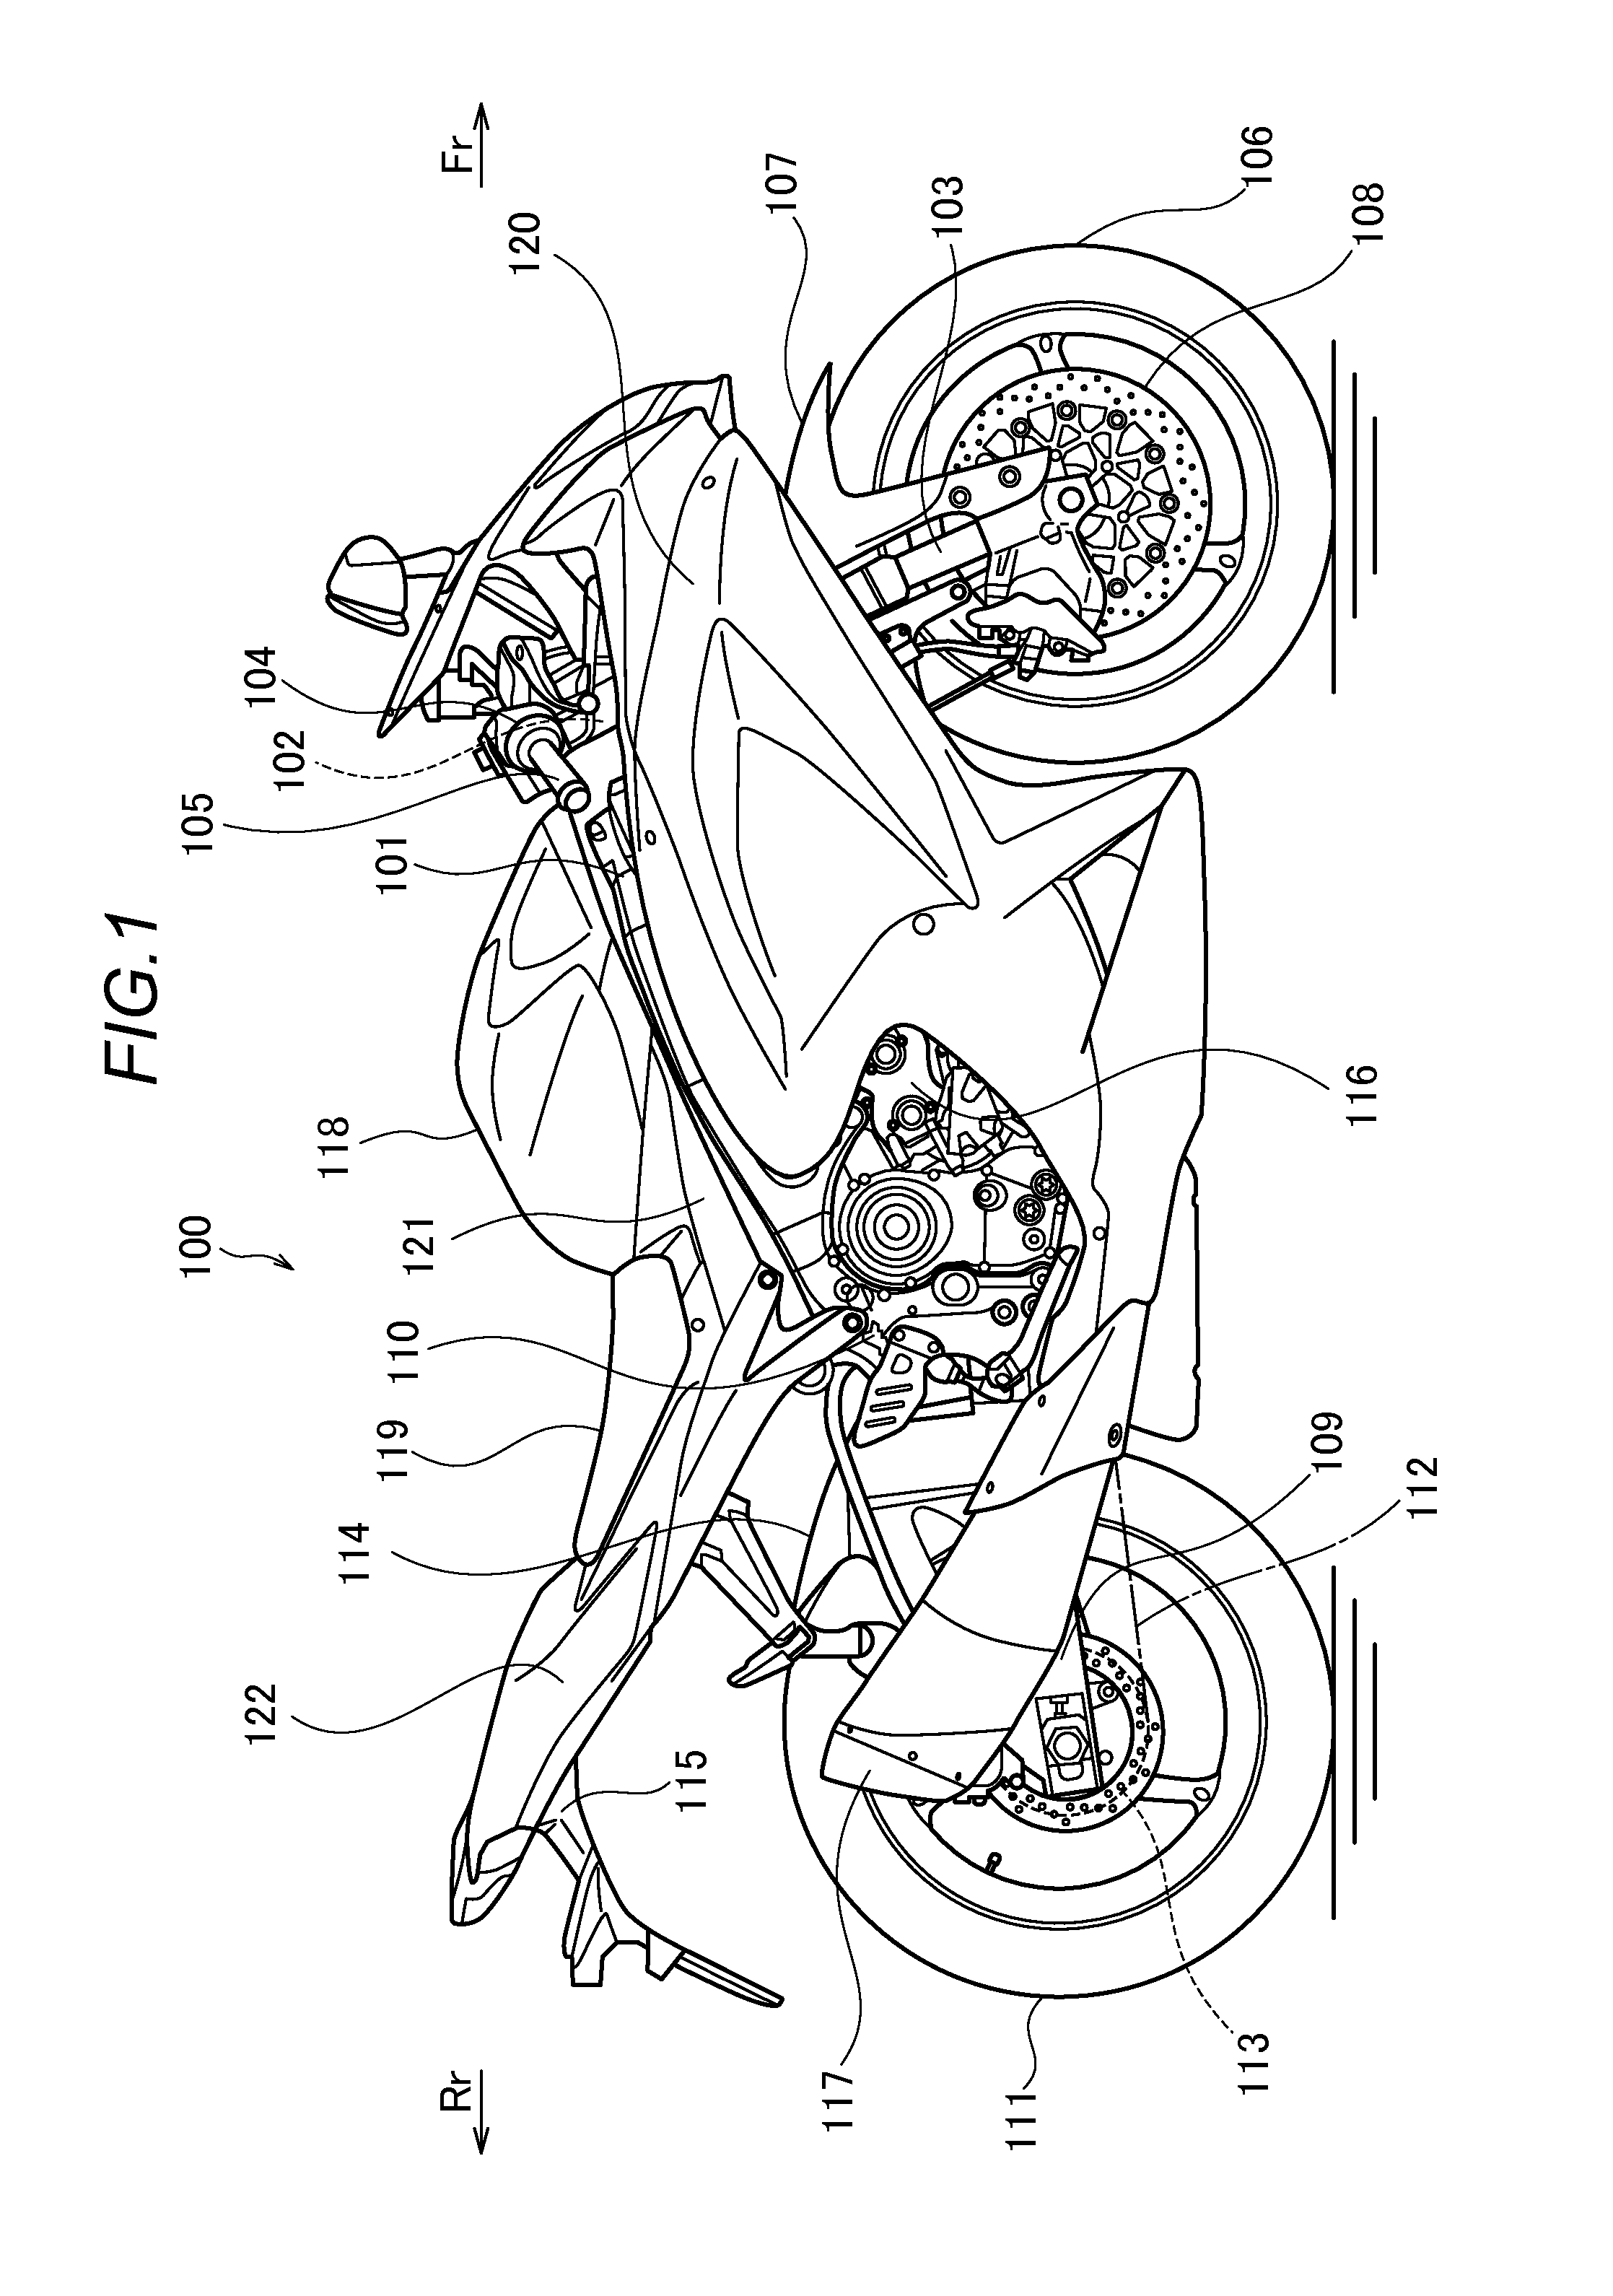 Air cleaner structure of motorcycle